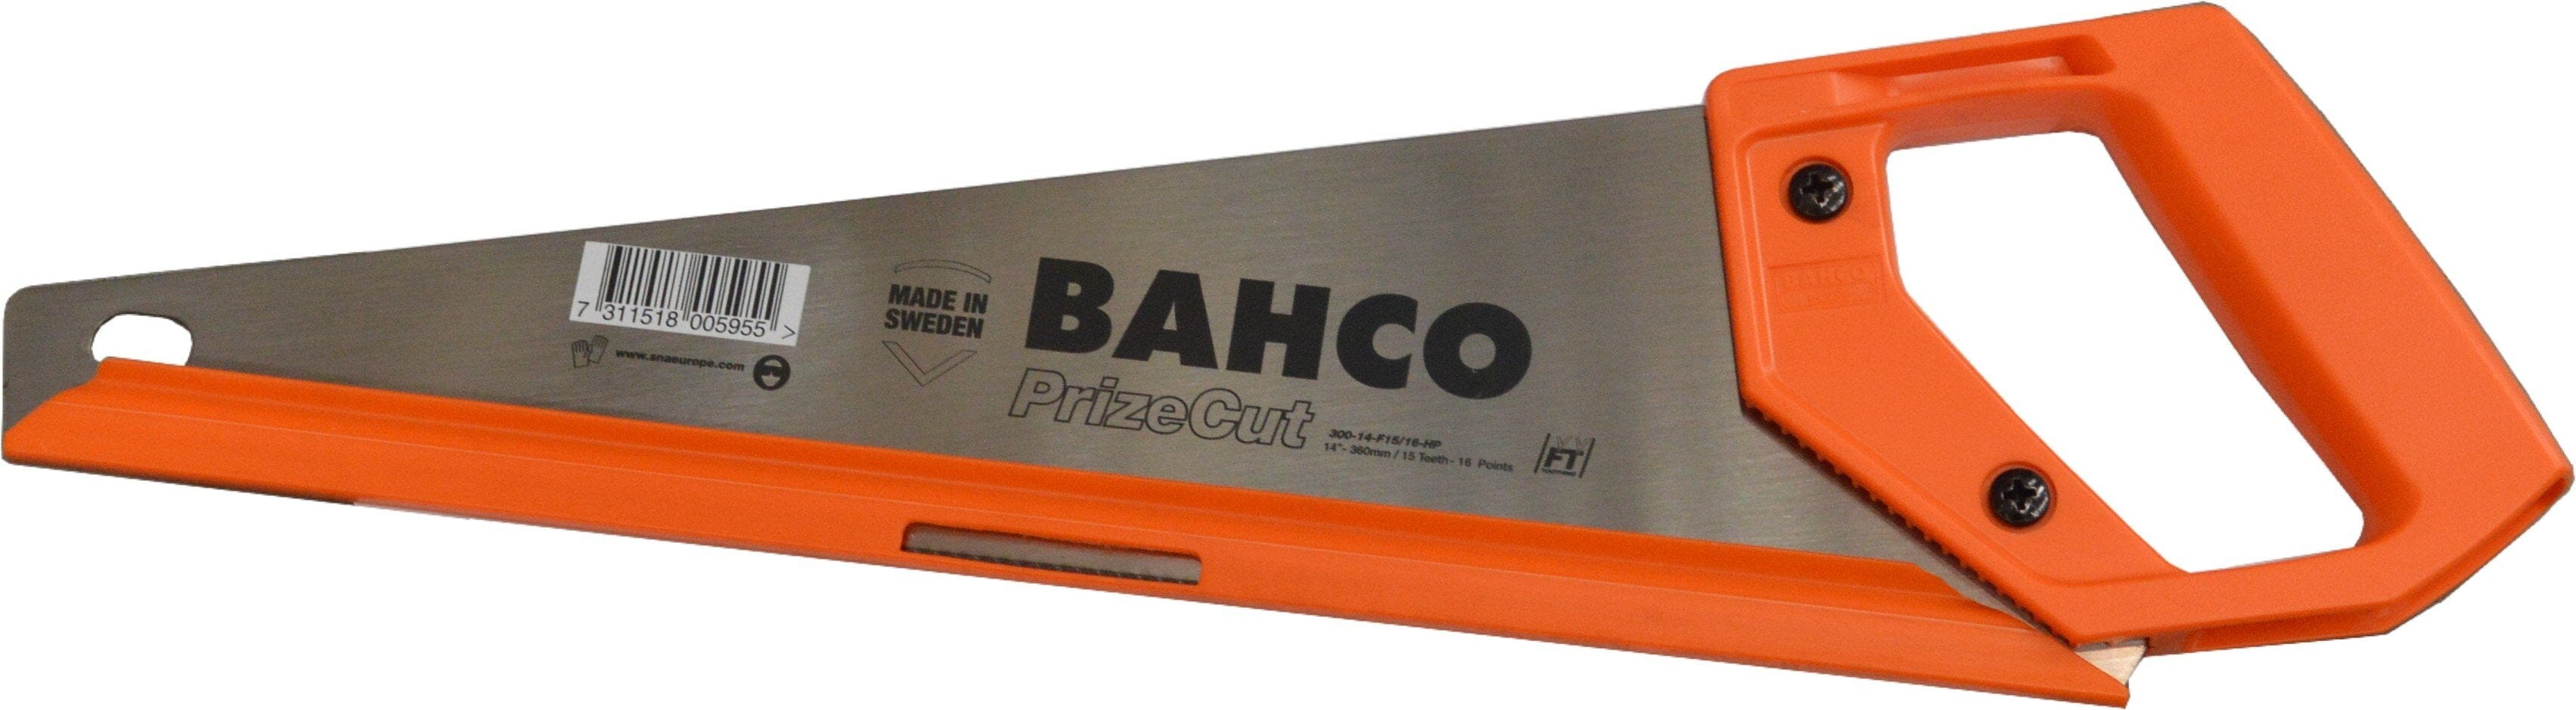 Bahco Hand Saw 16-Point 350mm